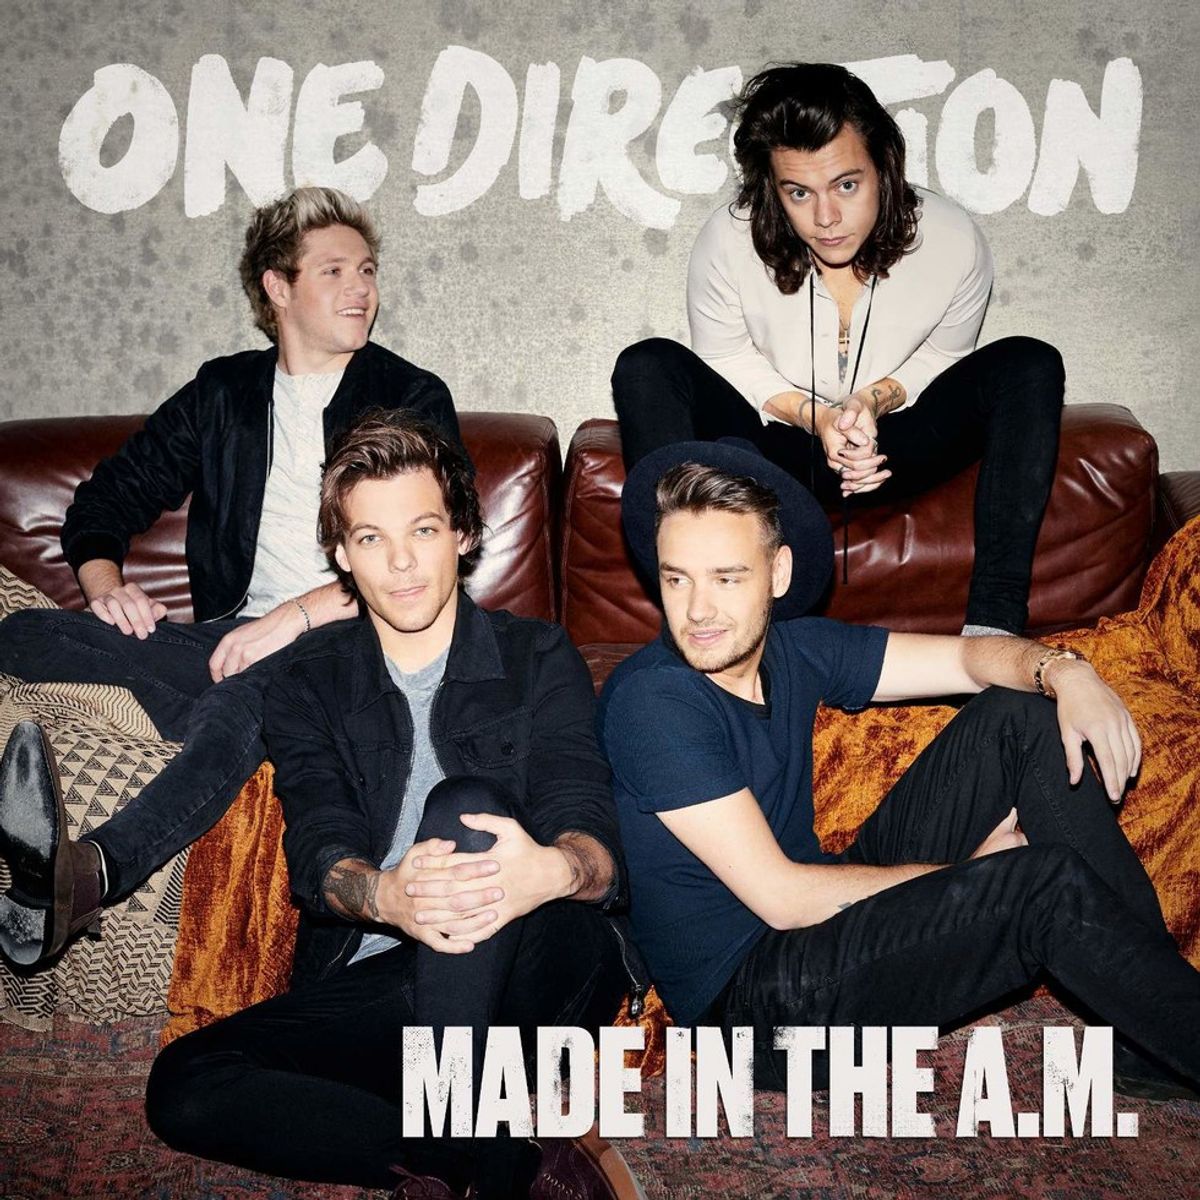 My Track-by-Track Review Of One Direction's Fifth Album